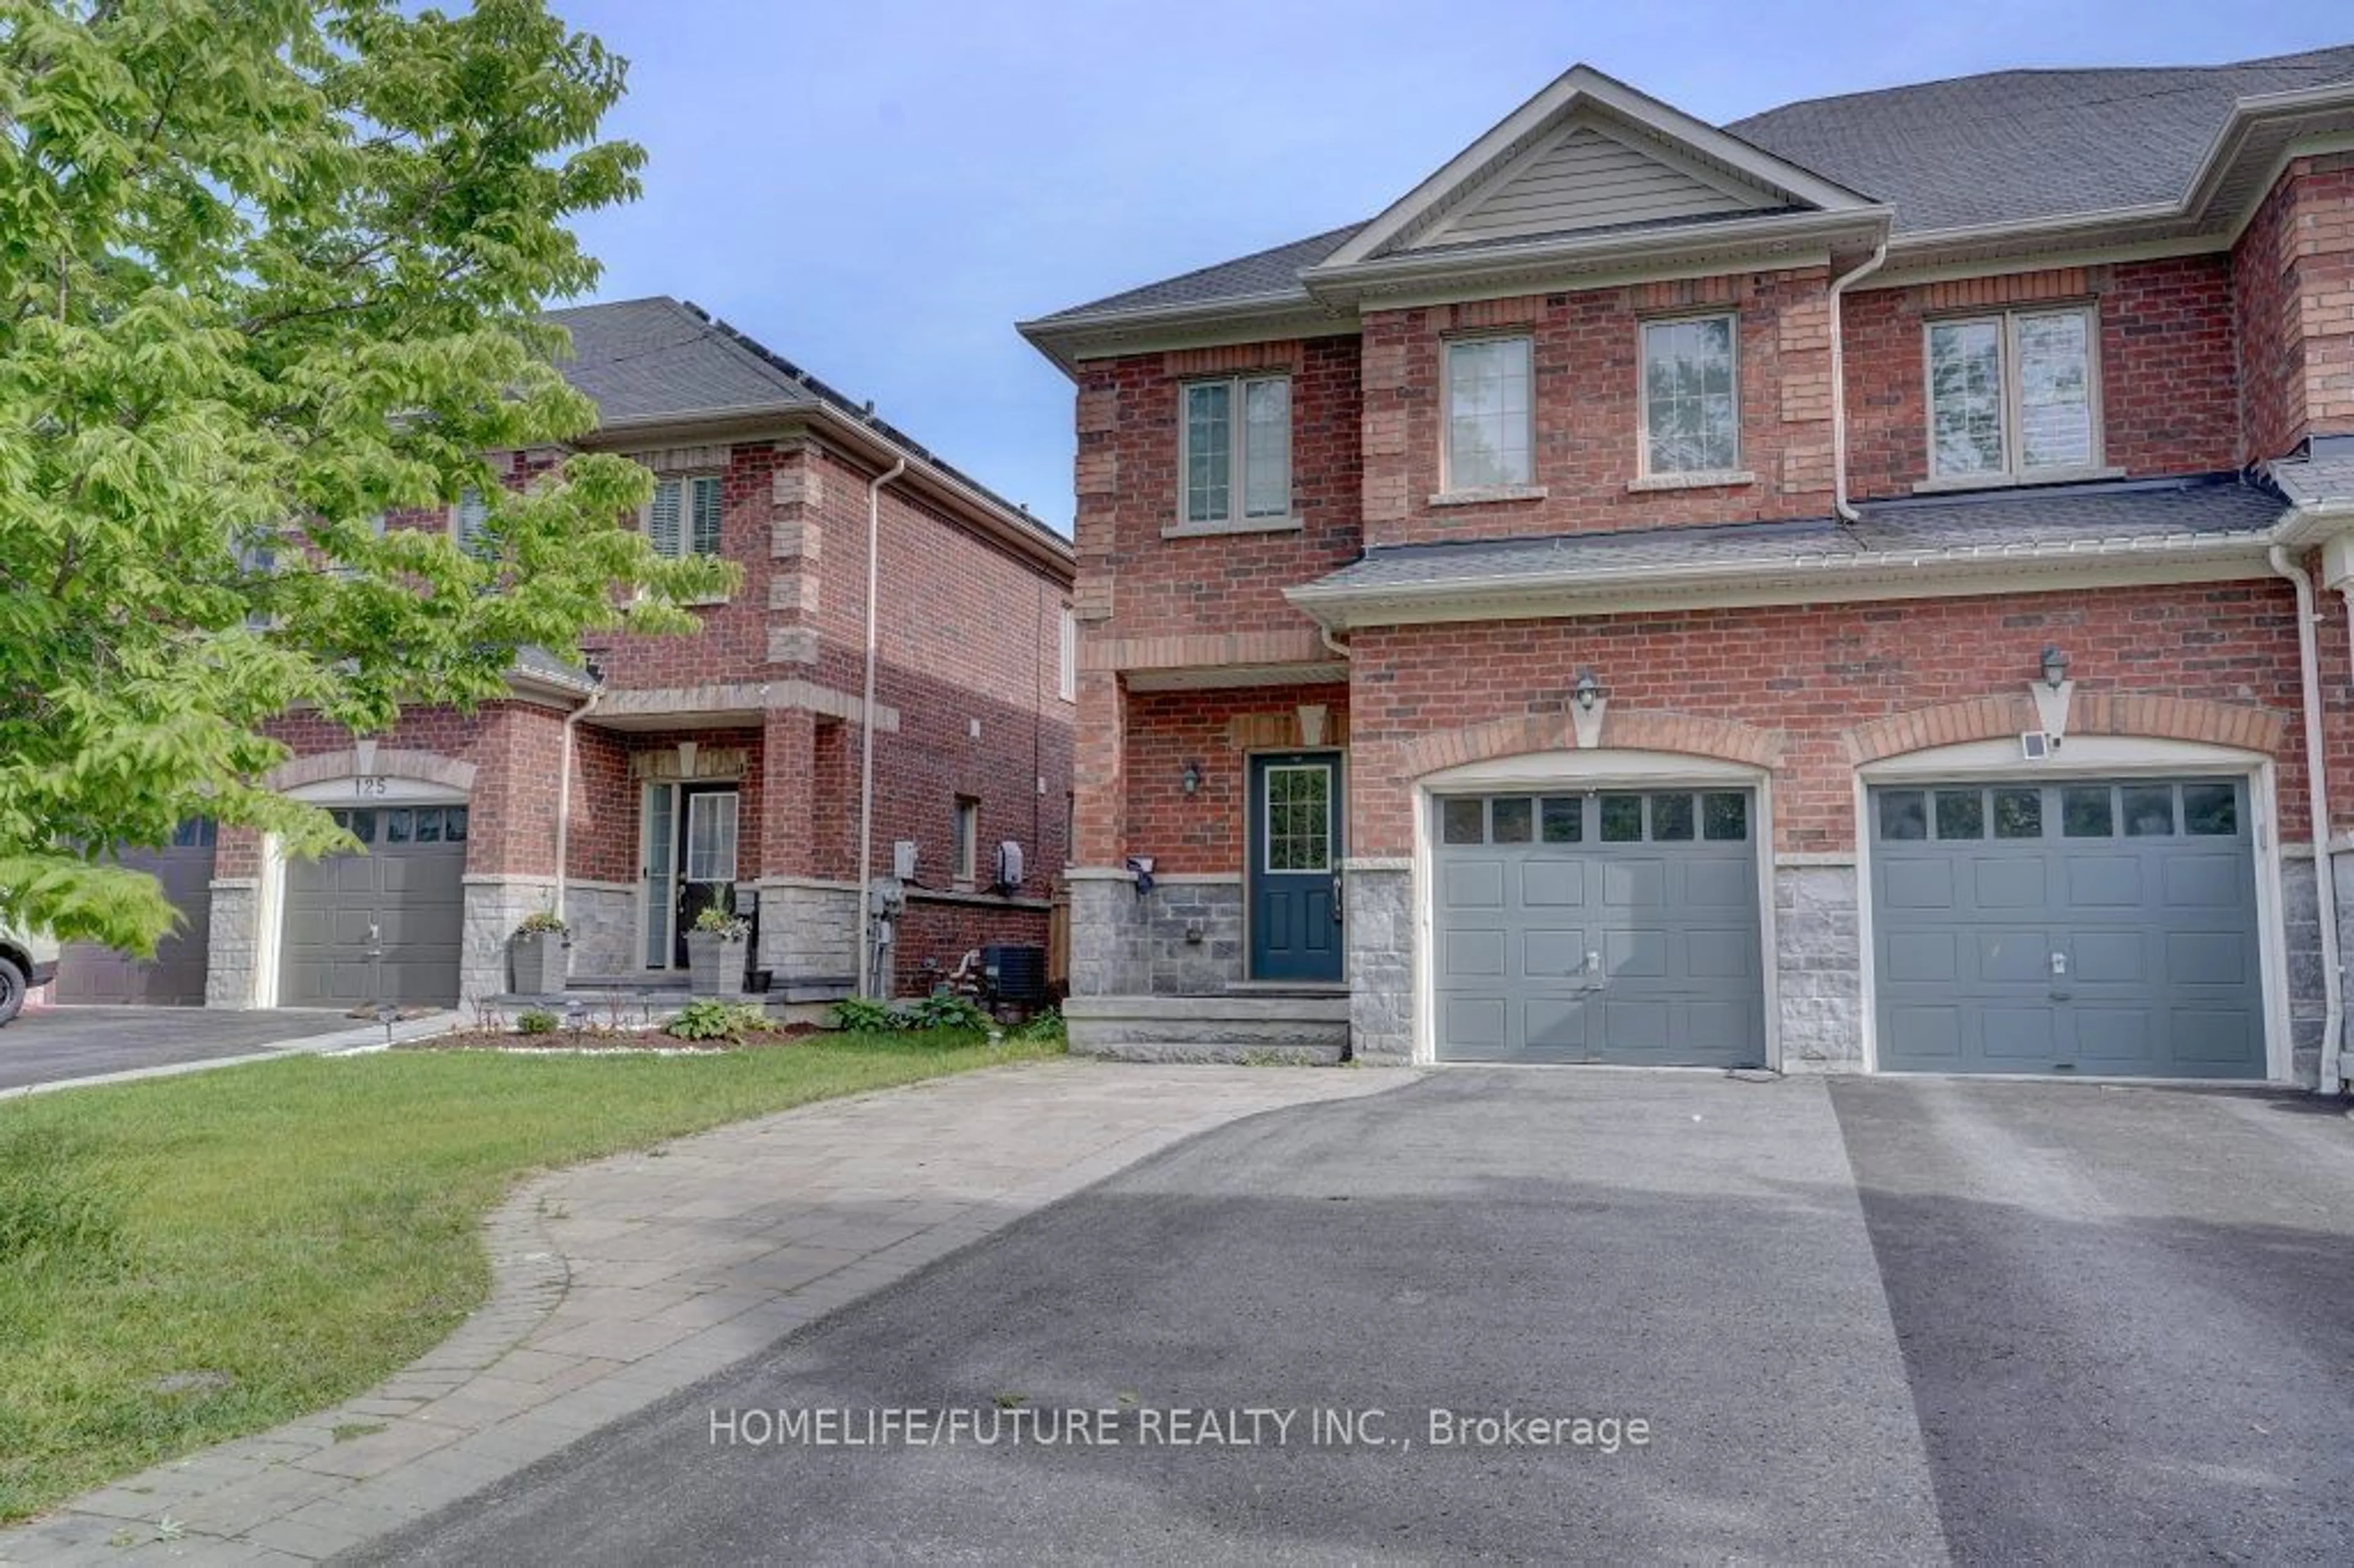 Home with brick exterior material for 123 Underwood Dr, Whitby Ontario L1M 0K9